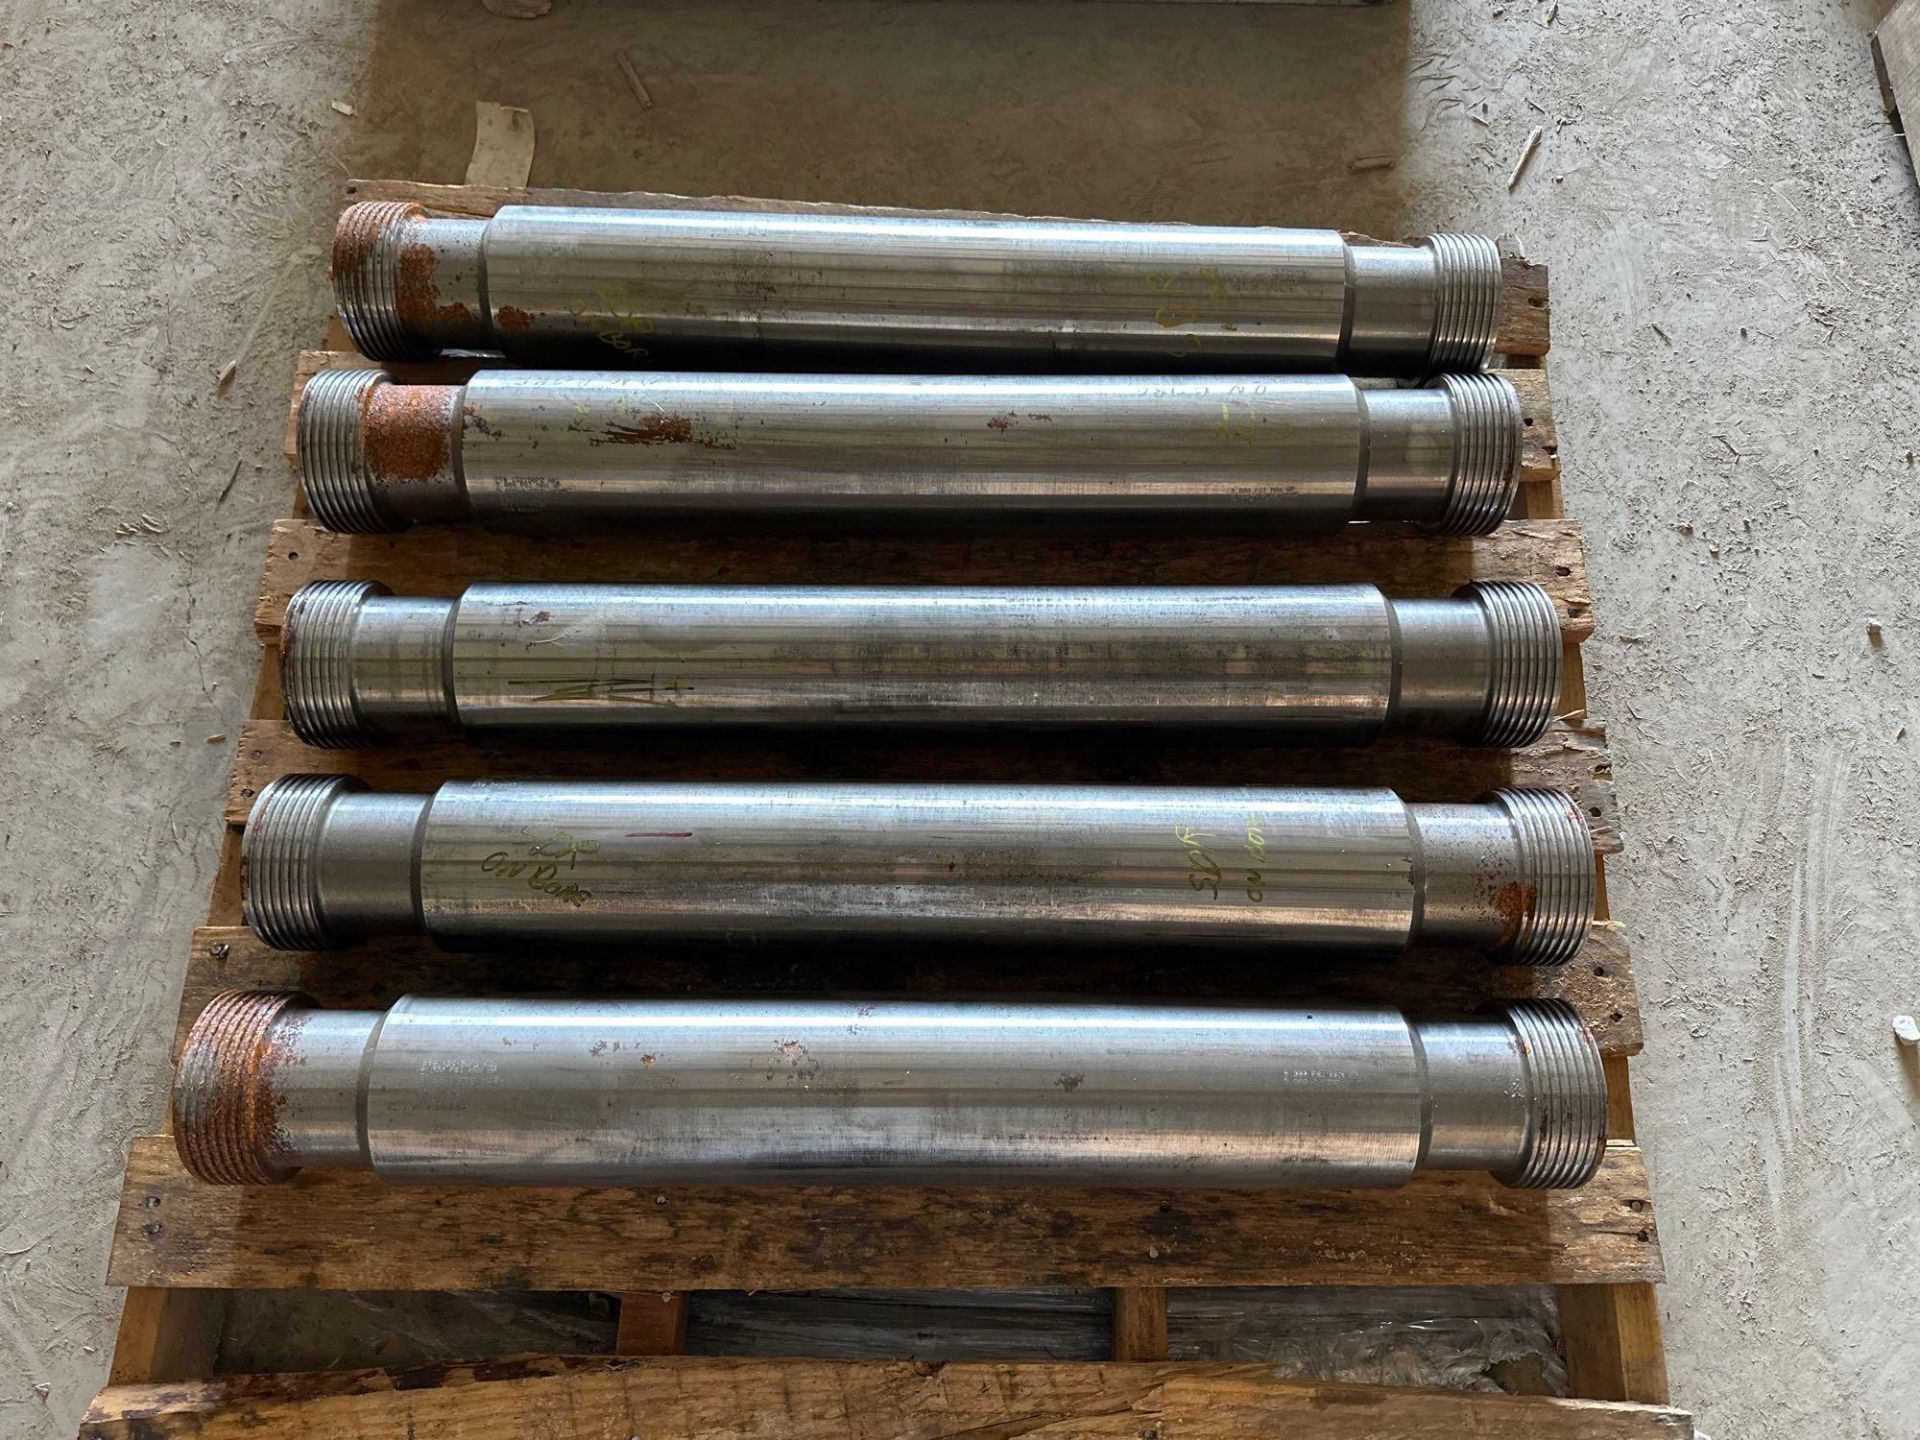 Lot of 5 “WIP” : 36” L P/N 132150P2 A01, 2.06” Bore,